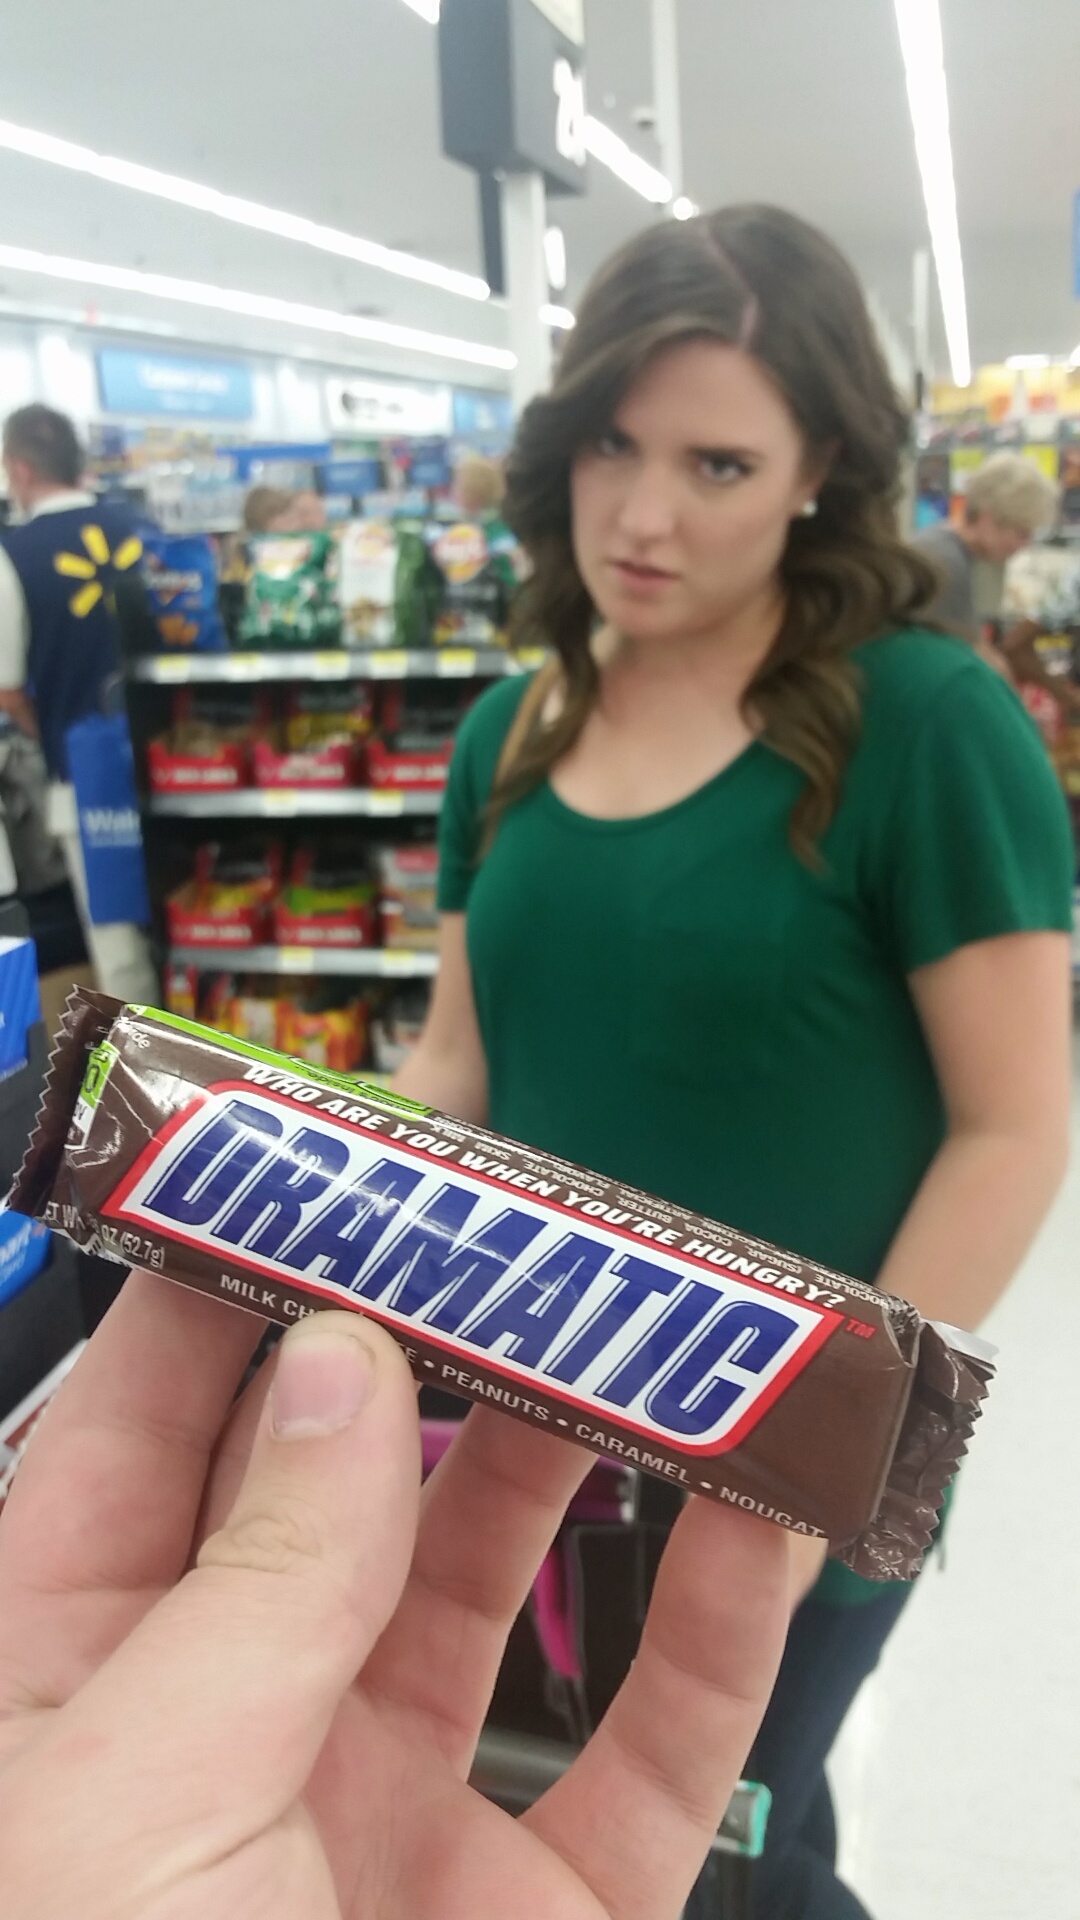 - dramatic snickers - Oramatic